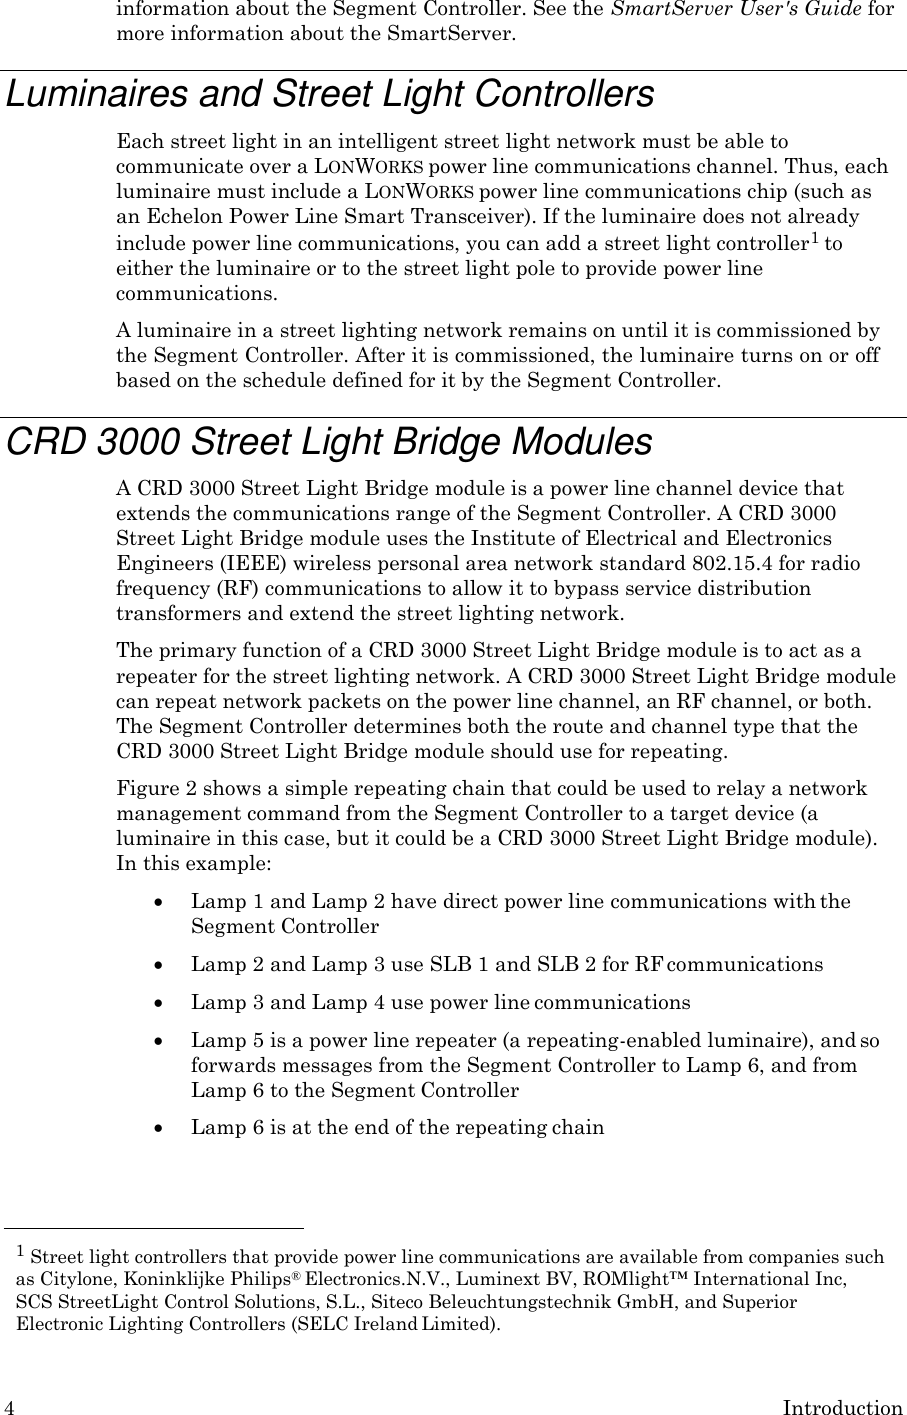 4 Introduction  information about the Segment Controller. See the SmartServer User&apos;s Guide for more information about the SmartServer.  Luminaires and Street Light Controllers Each street light in an intelligent street light network must be able to communicate over a LONWORKS power line communications channel. Thus, each luminaire must include a LONWORKS power line communications chip (such as an Echelon Power Line Smart Transceiver). If the luminaire does not already include power line communications, you can add a street light controller1 to either the luminaire or to the street light pole to provide power line communications. A luminaire in a street lighting network remains on until it is commissioned by the Segment Controller. After it is commissioned, the luminaire turns on or off based on the schedule defined for it by the Segment Controller.  CRD 3000 Street Light Bridge Modules A CRD 3000 Street Light Bridge module is a power line channel device that extends the communications range of the Segment Controller. A CRD 3000 Street Light Bridge module uses the Institute of Electrical and Electronics Engineers (IEEE) wireless personal area network standard 802.15.4 for radio frequency (RF) communications to allow it to bypass service distribution transformers and extend the street lighting network. The primary function of a CRD 3000 Street Light Bridge module is to act as a repeater for the street lighting network. A CRD 3000 Street Light Bridge module can repeat network packets on the power line channel, an RF channel, or both. The Segment Controller determines both the route and channel type that the CRD 3000 Street Light Bridge module should use for repeating. Figure 2 shows a simple repeating chain that could be used to relay a network management command from the Segment Controller to a target device (a luminaire in this case, but it could be a CRD 3000 Street Light Bridge module). In this example:  Lamp 1 and Lamp 2 have direct power line communications with the Segment Controller  Lamp 2 and Lamp 3 use SLB 1 and SLB 2 for RF communications  Lamp 3 and Lamp 4 use power line communications  Lamp 5 is a power line repeater (a repeating-enabled luminaire), and so forwards messages from the Segment Controller to Lamp 6, and from Lamp 6 to the Segment Controller  Lamp 6 is at the end of the repeating chain    1 Street light controllers that provide power line communications are available from companies such as Citylone, Koninklijke Philips® Electronics.N.V., Luminext BV, ROMlight™ International Inc, SCS StreetLight Control Solutions, S.L., Siteco Beleuchtungstechnik GmbH, and Superior Electronic Lighting Controllers (SELC Ireland Limited). 